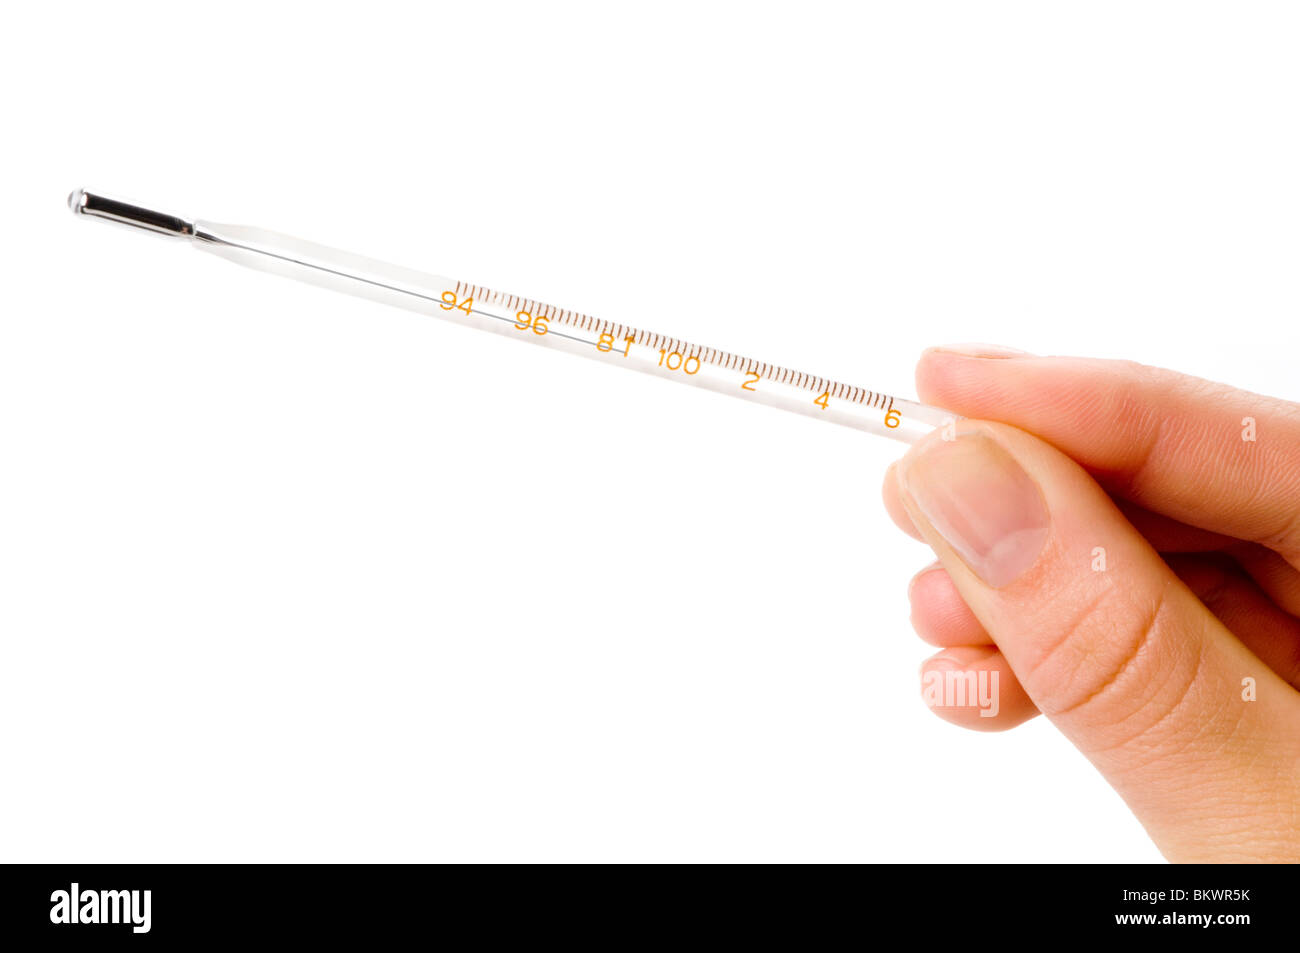 hand holding thermometer Stock Photo